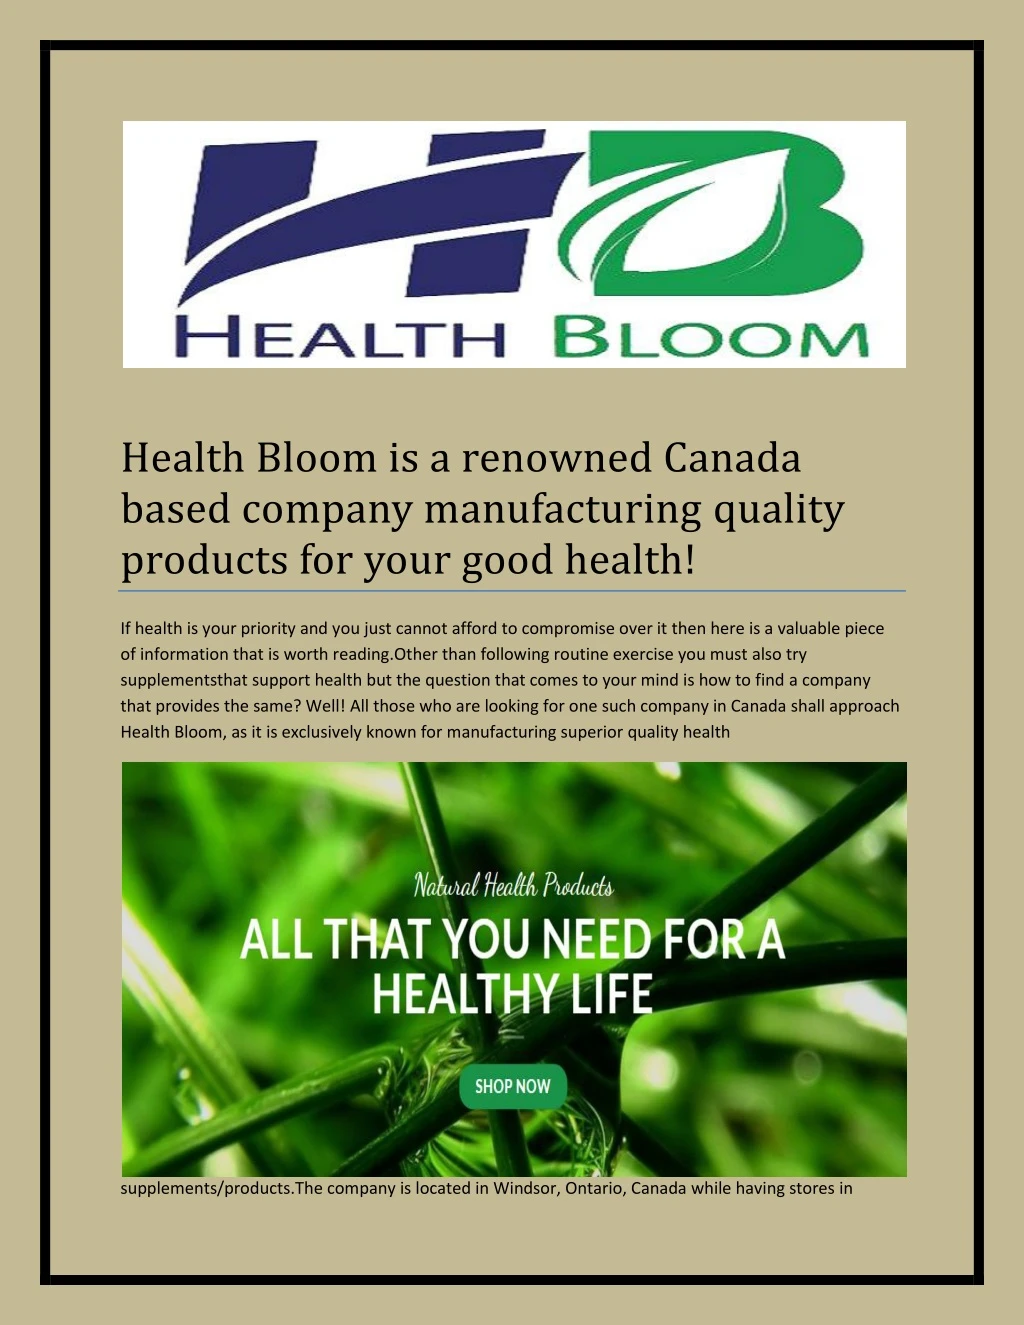 health bloom is a renowned canada based company